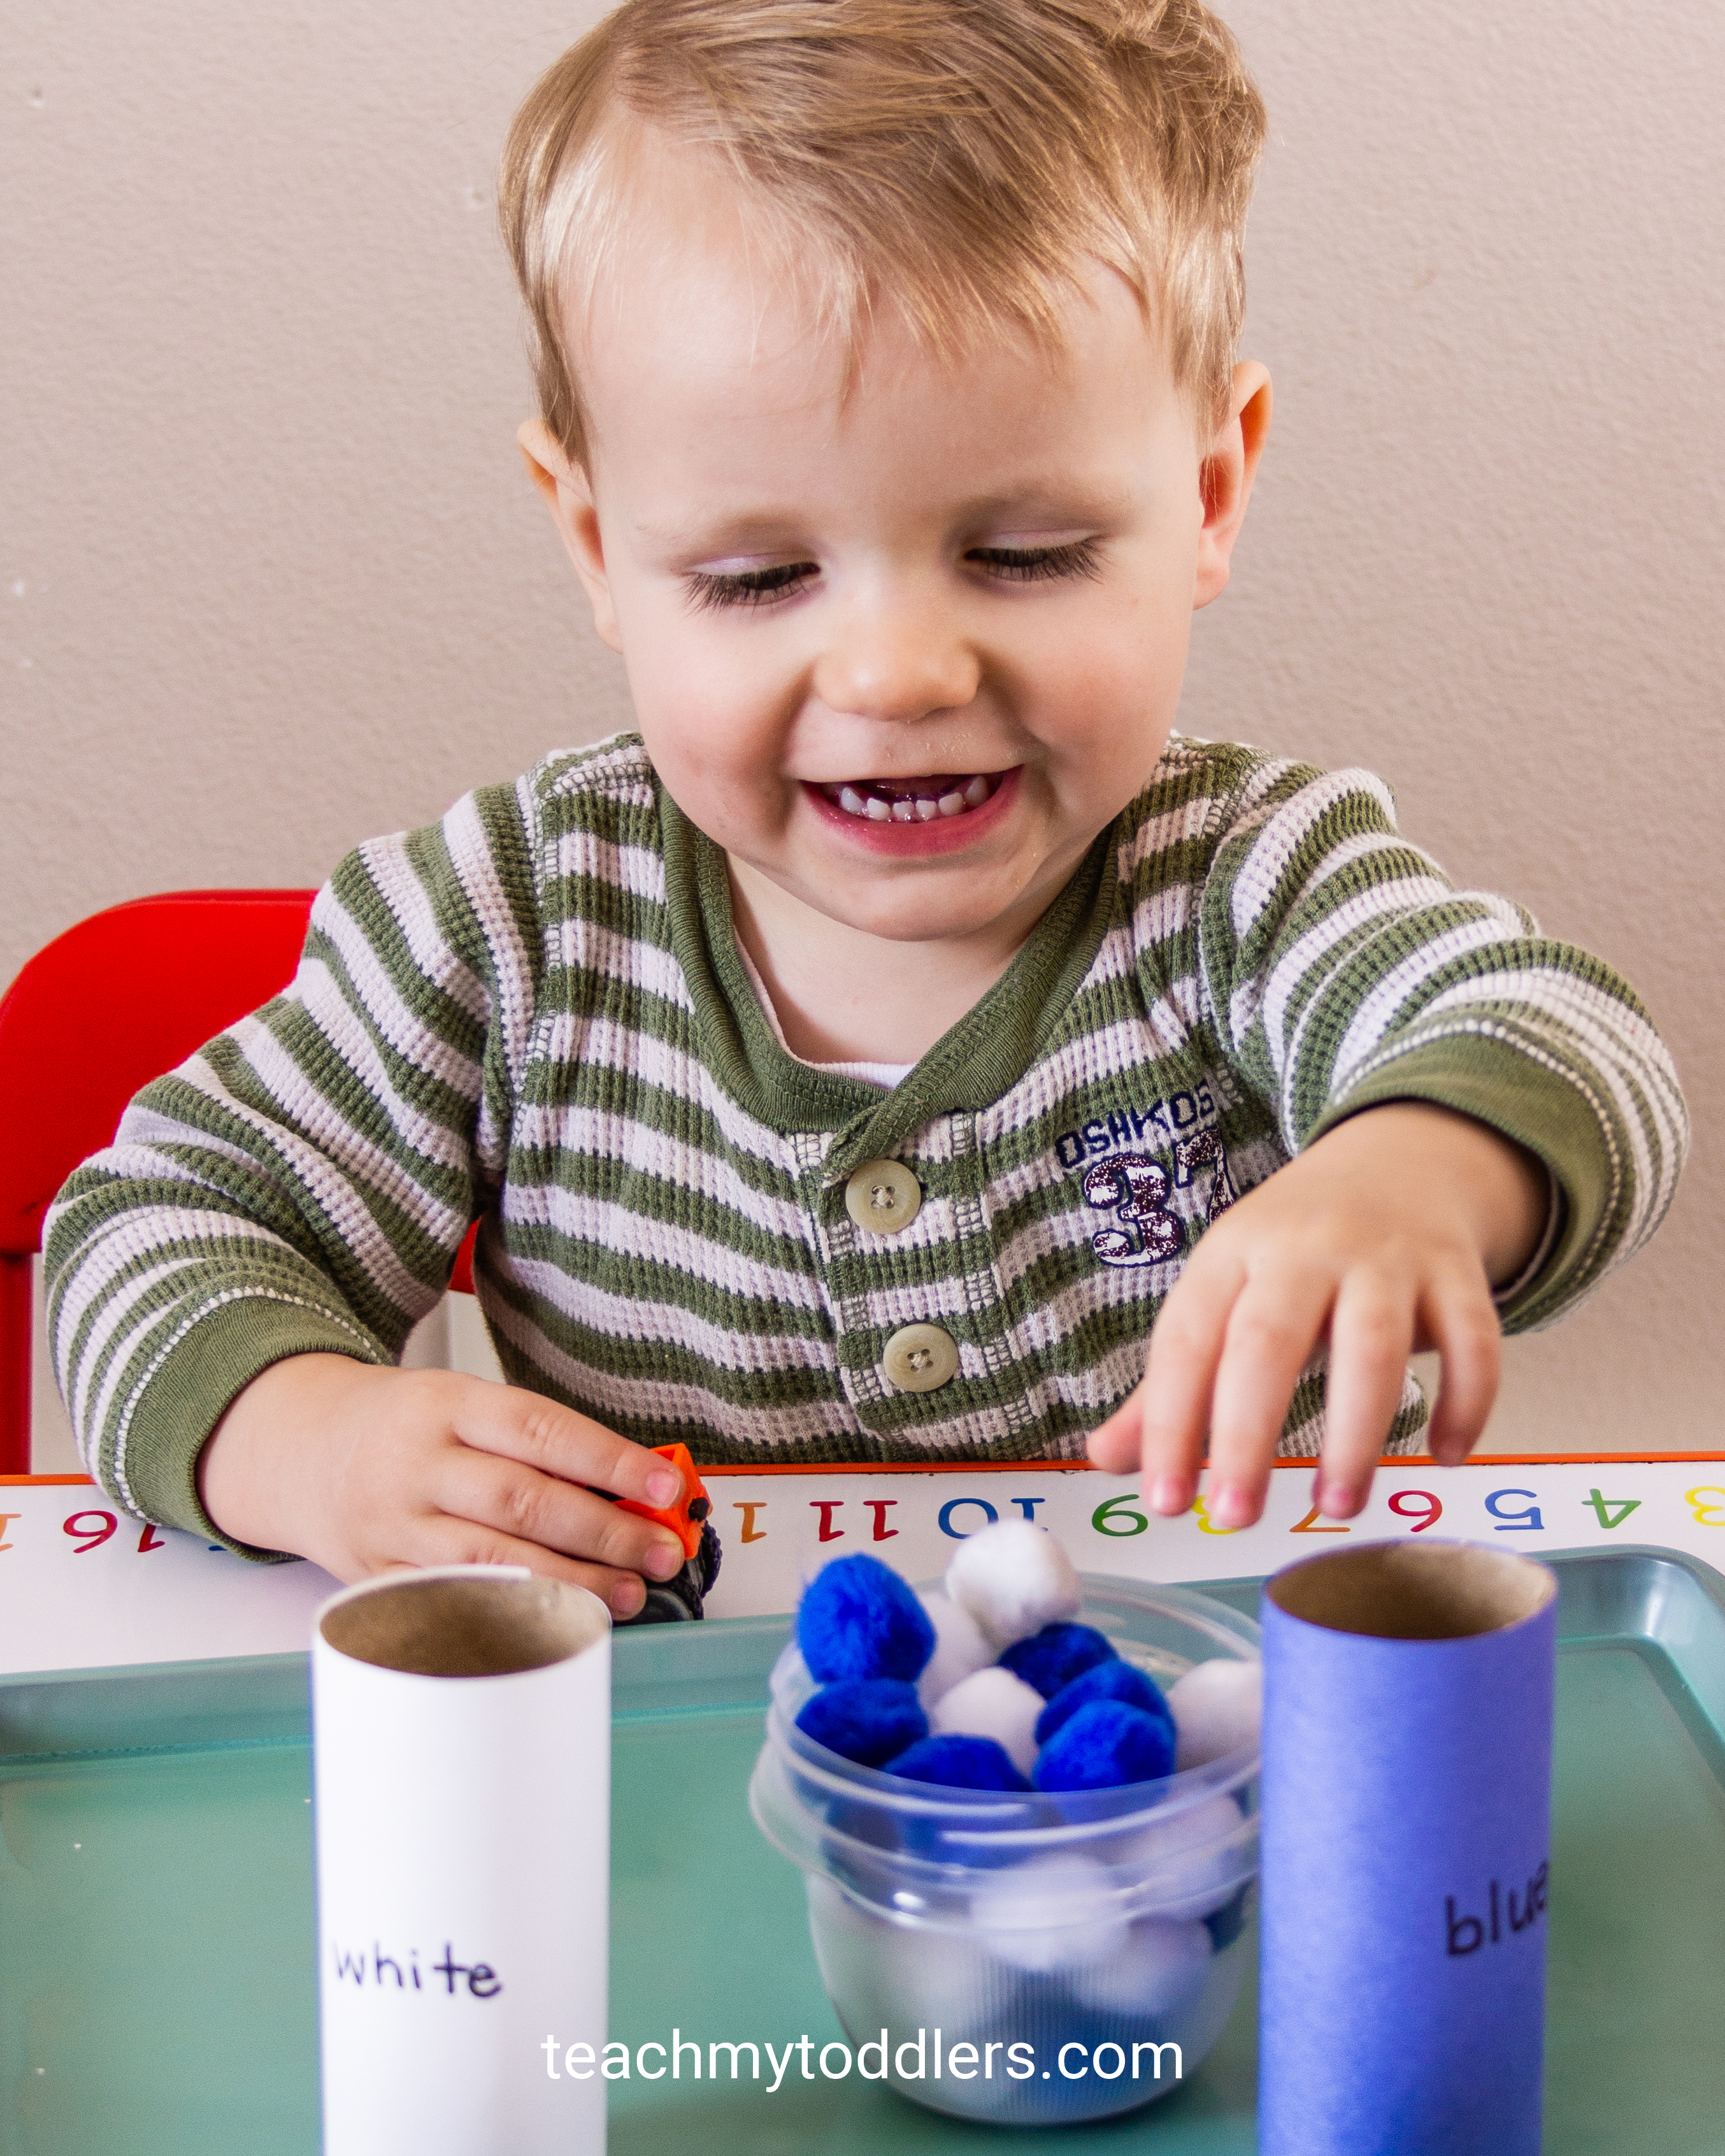 Teach your toddlers about cars using these great car activities